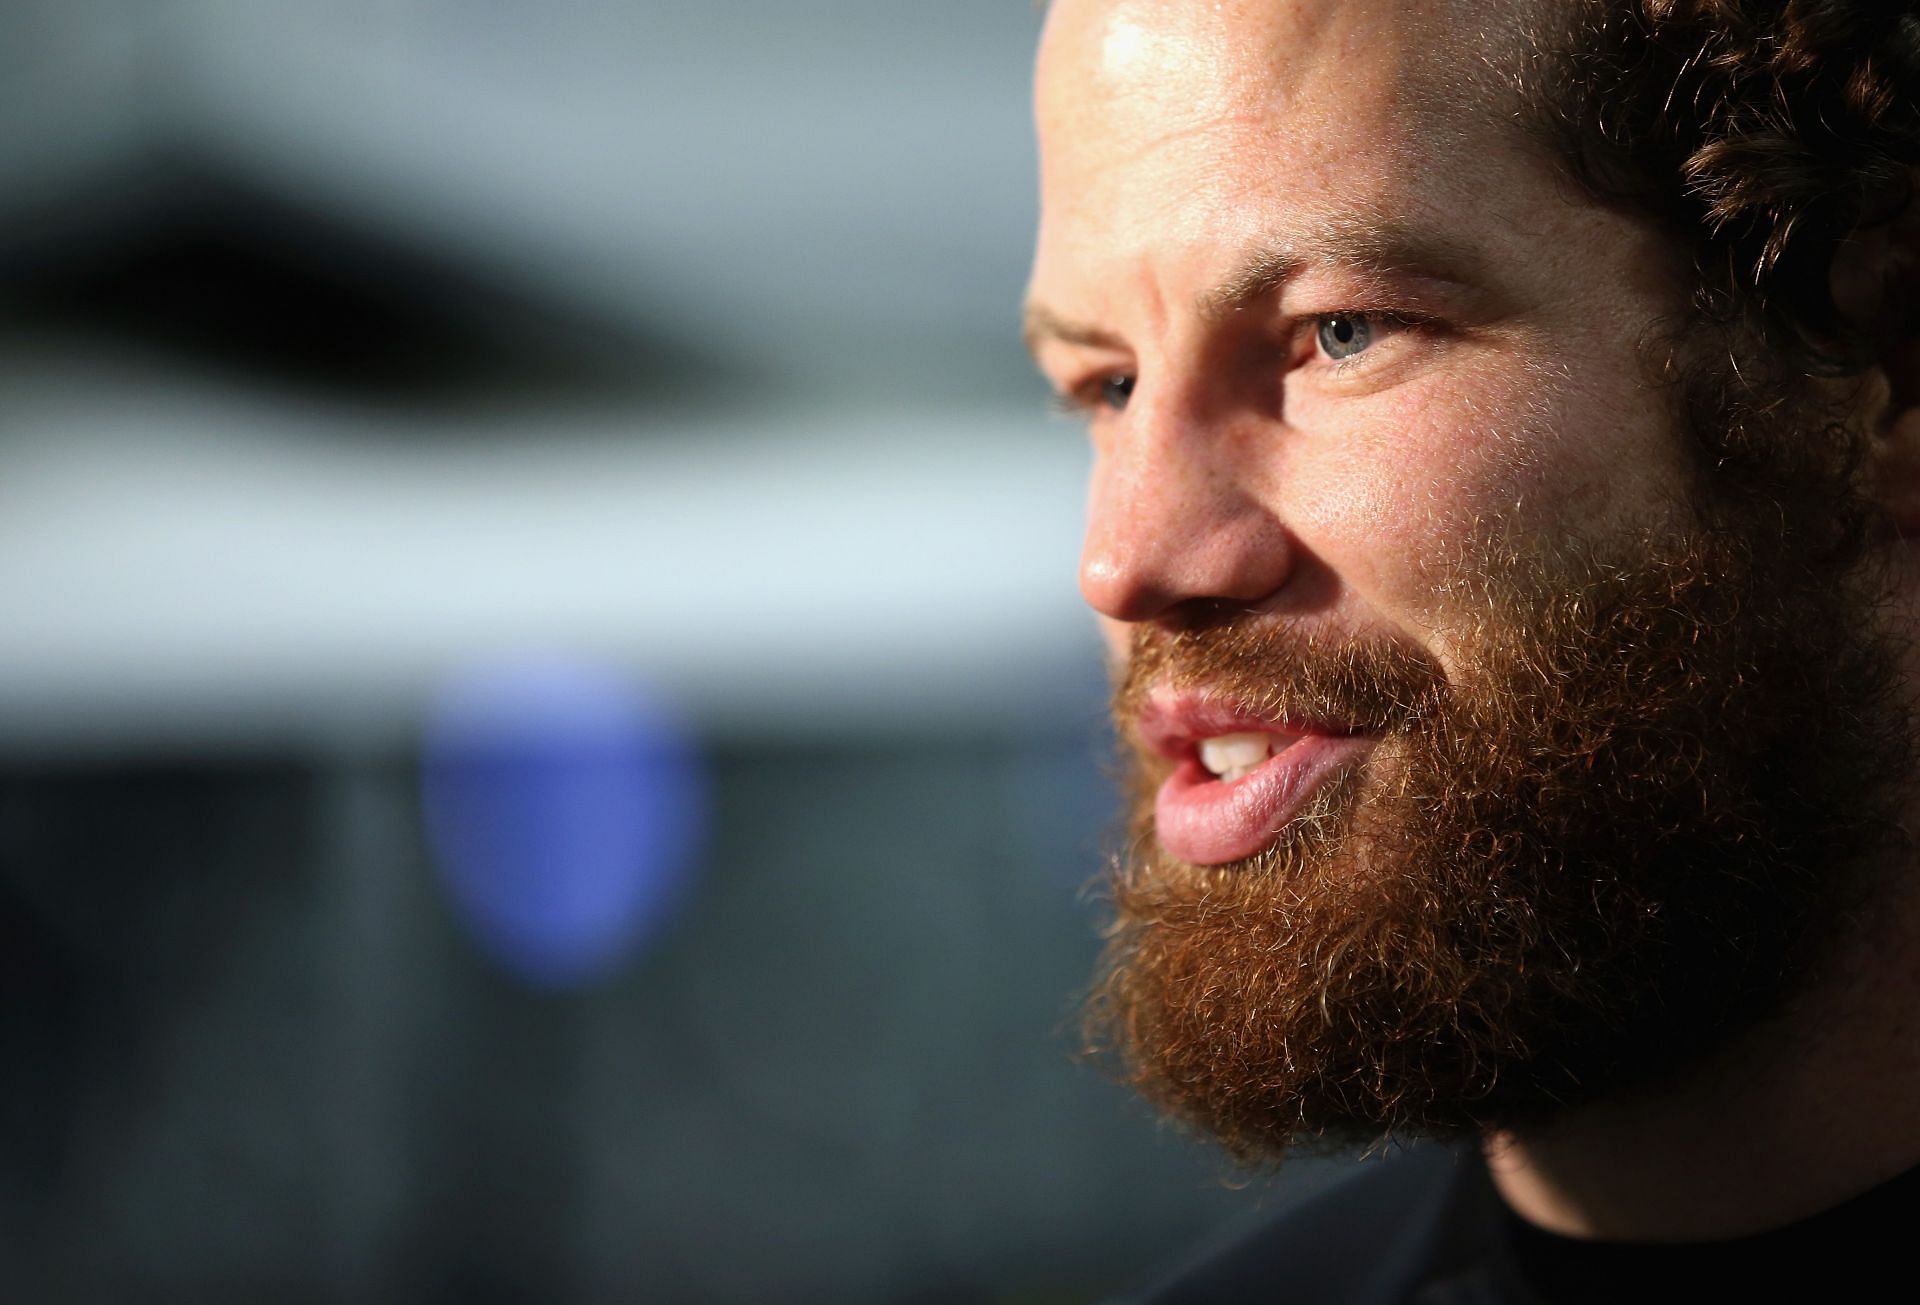 Nate Marquardt returned to the octagon in 2013 despite Dana White claiming he was once gone for good